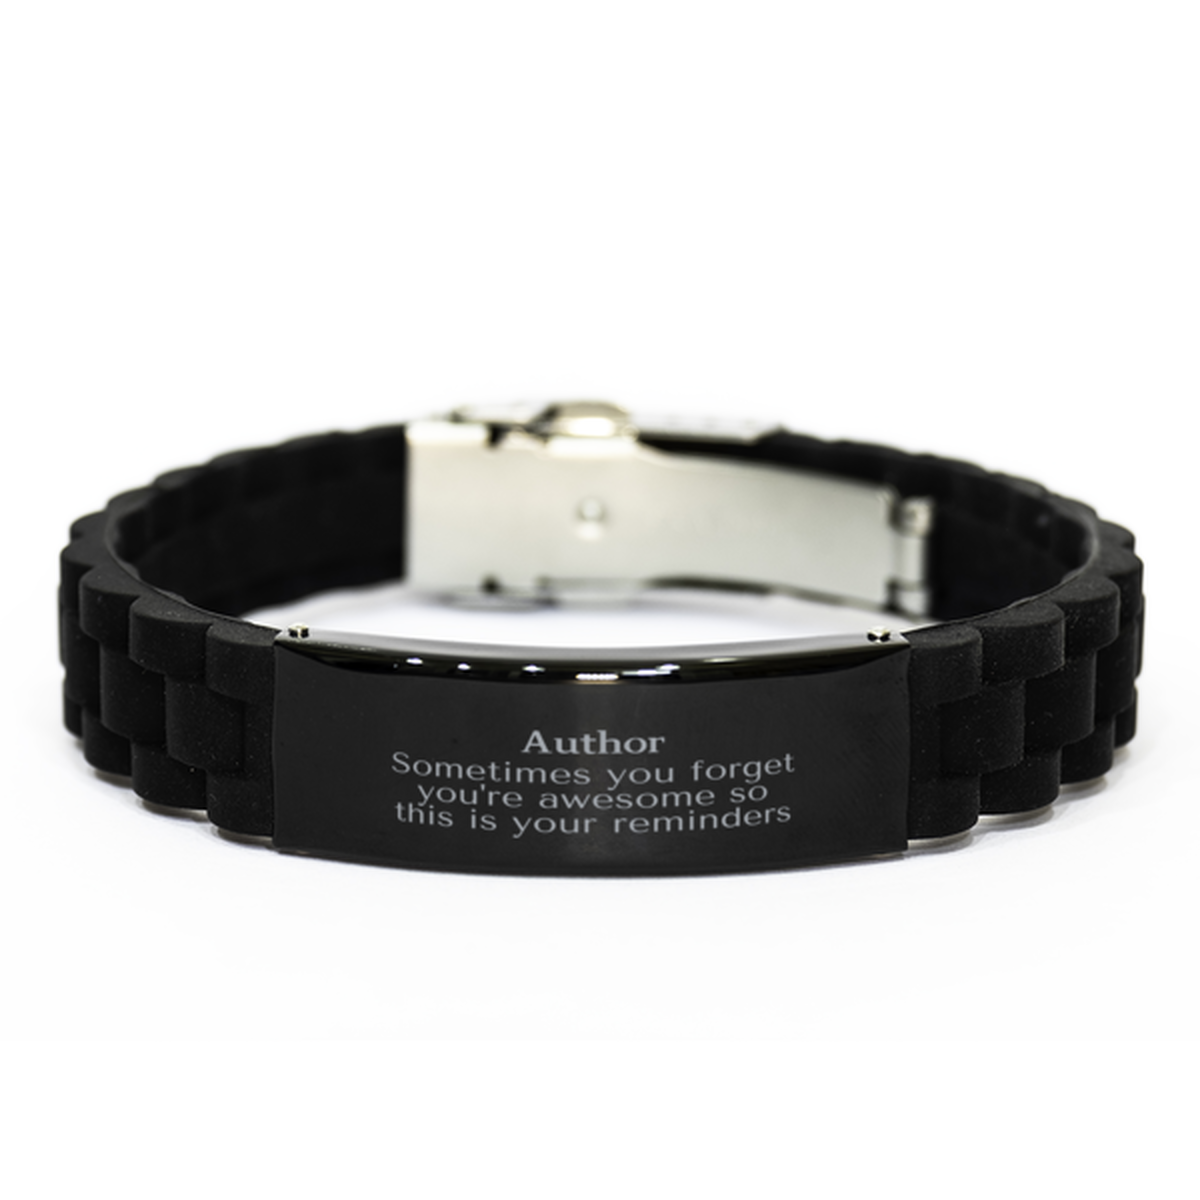 Sentimental Author Black Glidelock Clasp Bracelet, Author Sometimes you forget you're awesome so this is your reminders, Graduation Christmas Birthday Gifts for Author, Men, Women, Coworkers